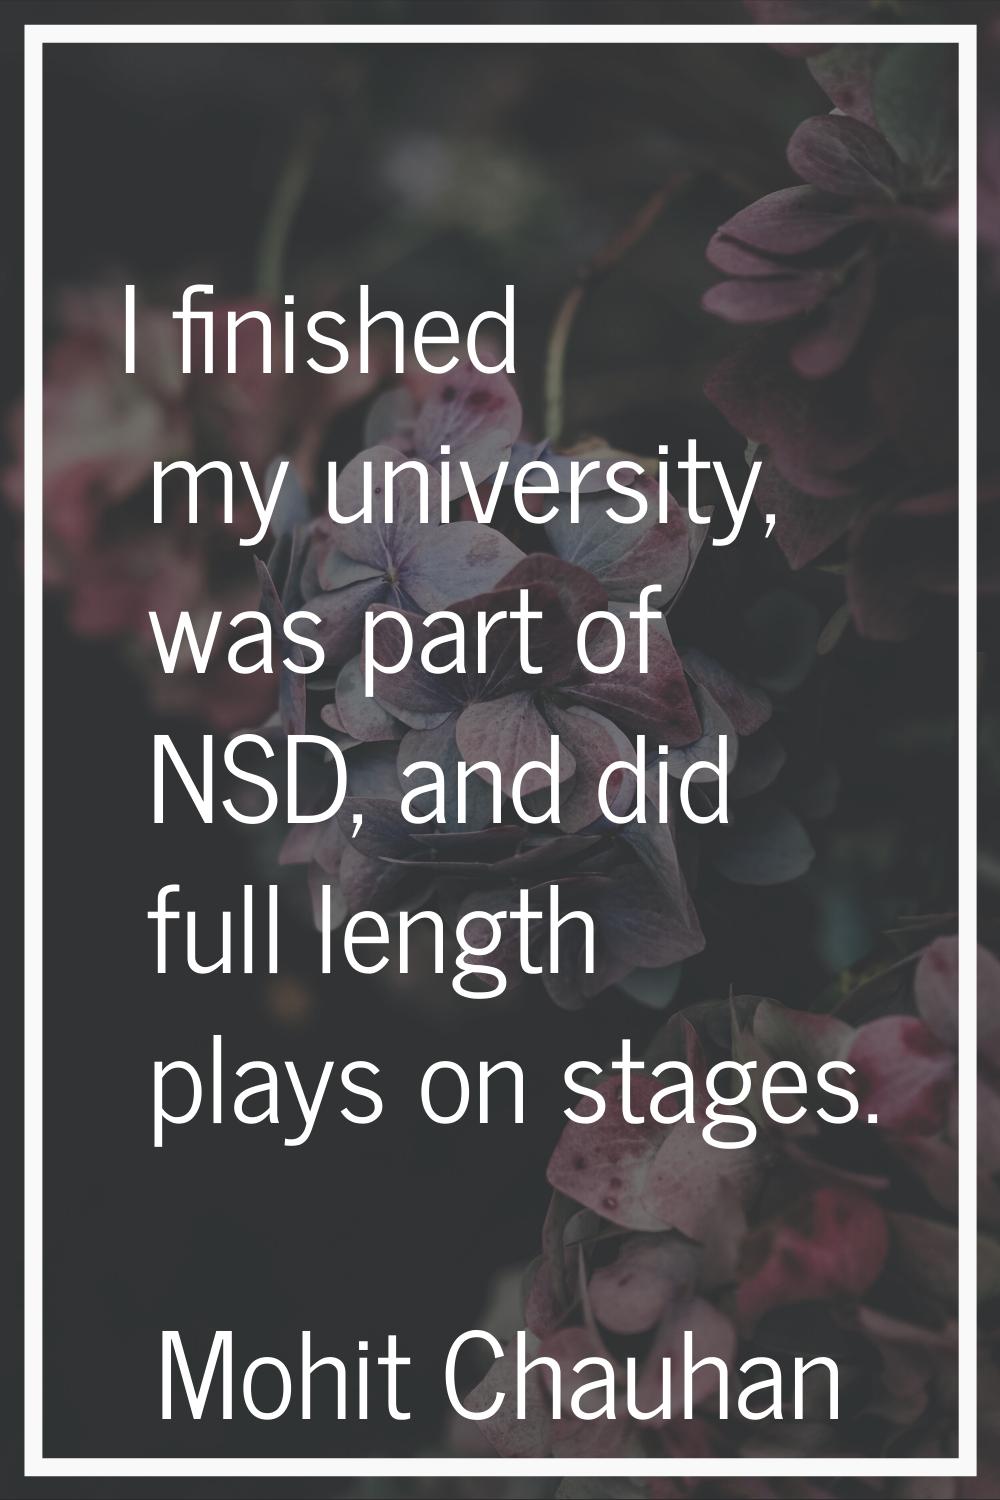 I finished my university, was part of NSD, and did full length plays on stages.